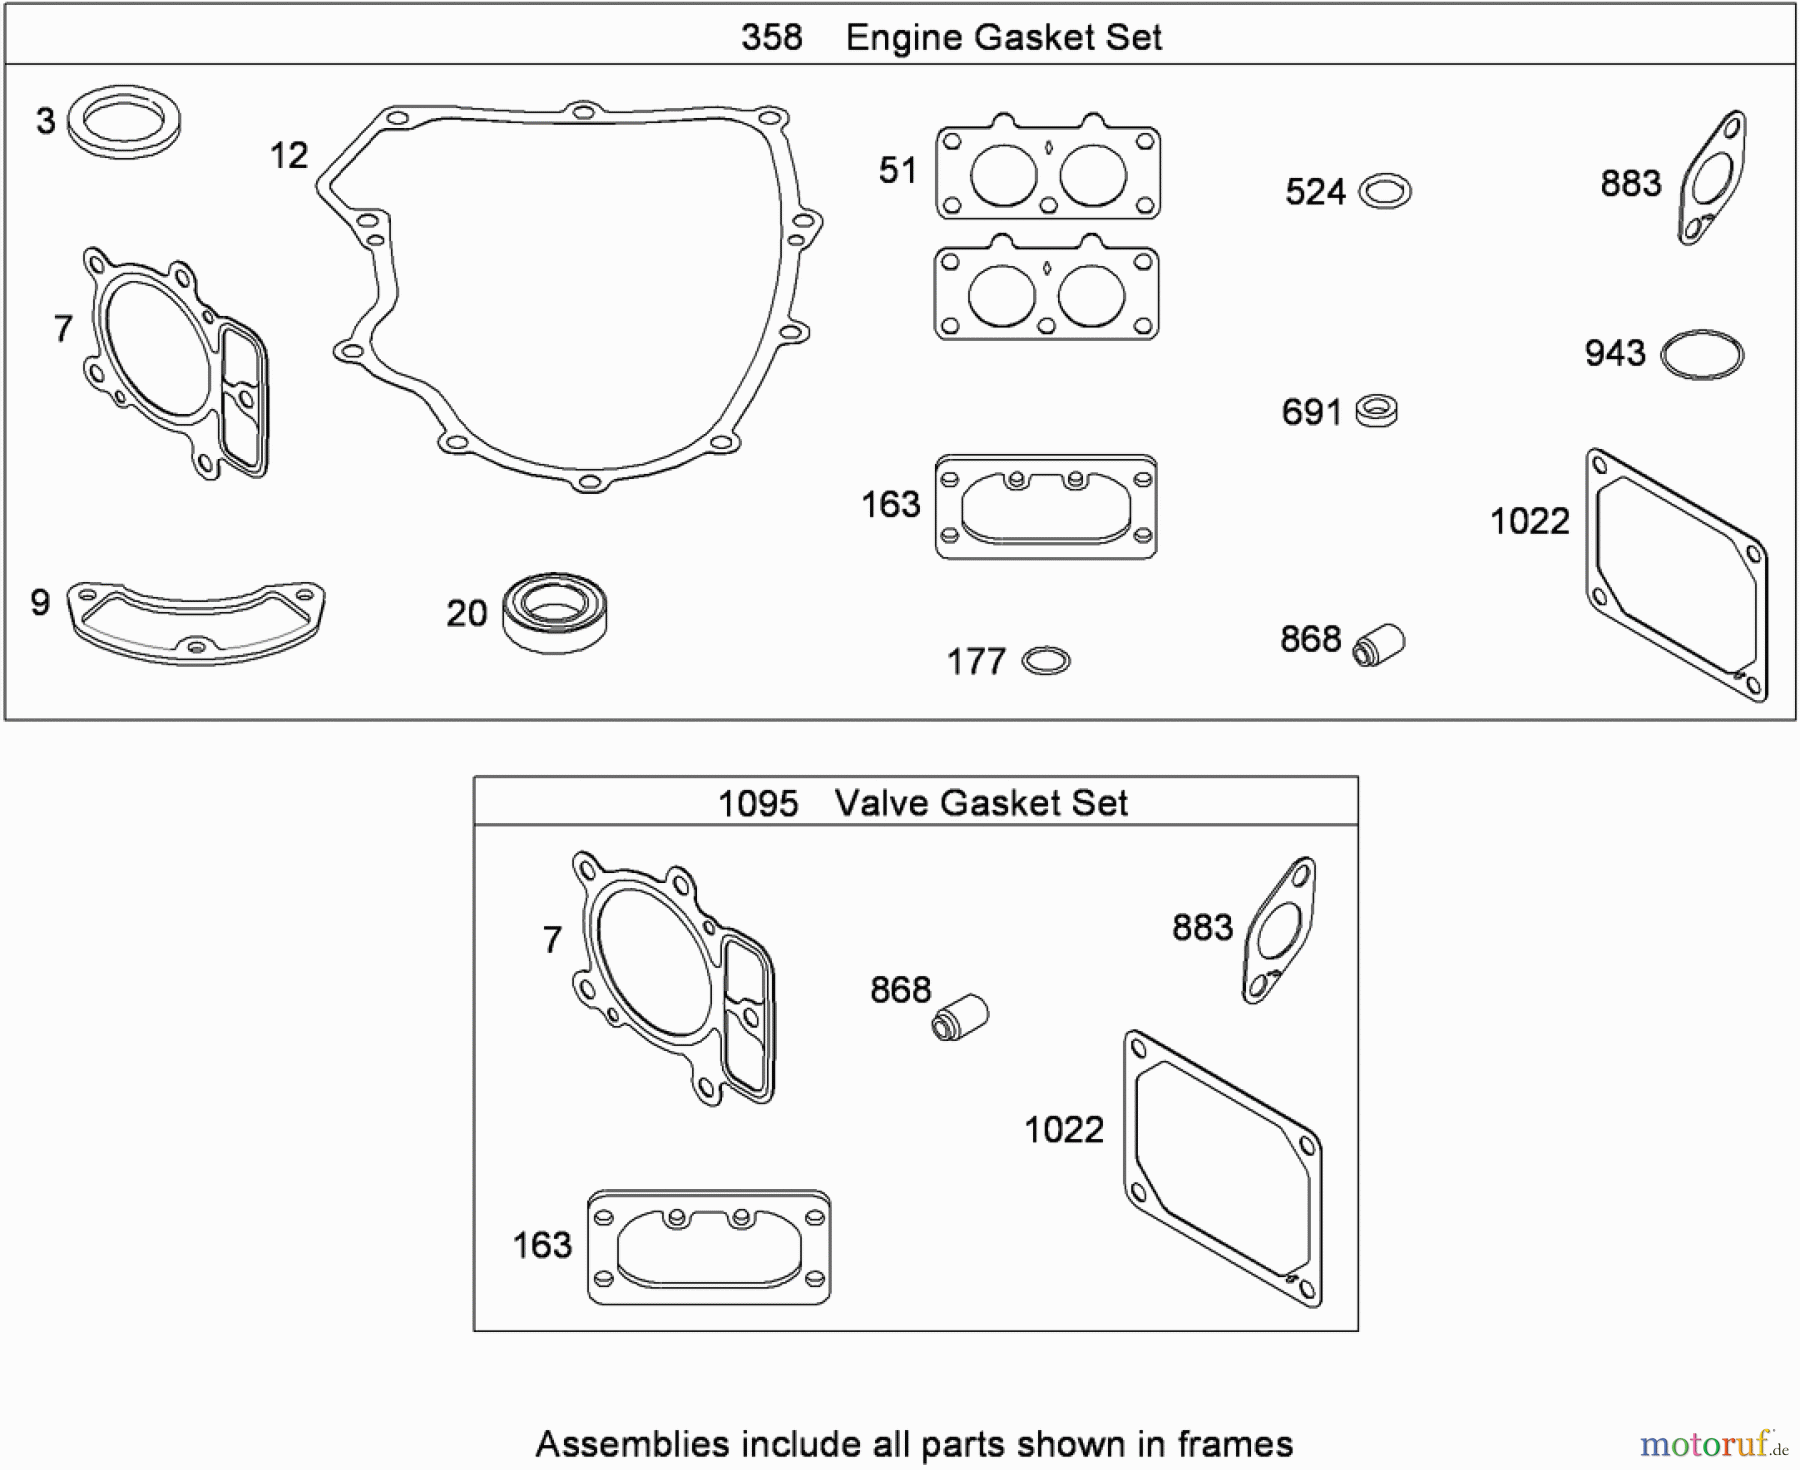  Toro Neu Mowers, Lawn & Garden Tractor Seite 1 13AT61RH048 (LX466) - Toro LX466 Lawn Tractor, 2008 (SN 1L137H10100-) ENGINE AND VALVE GASKET SETS BRIGGS AND STRATTON 407777-0550-B1